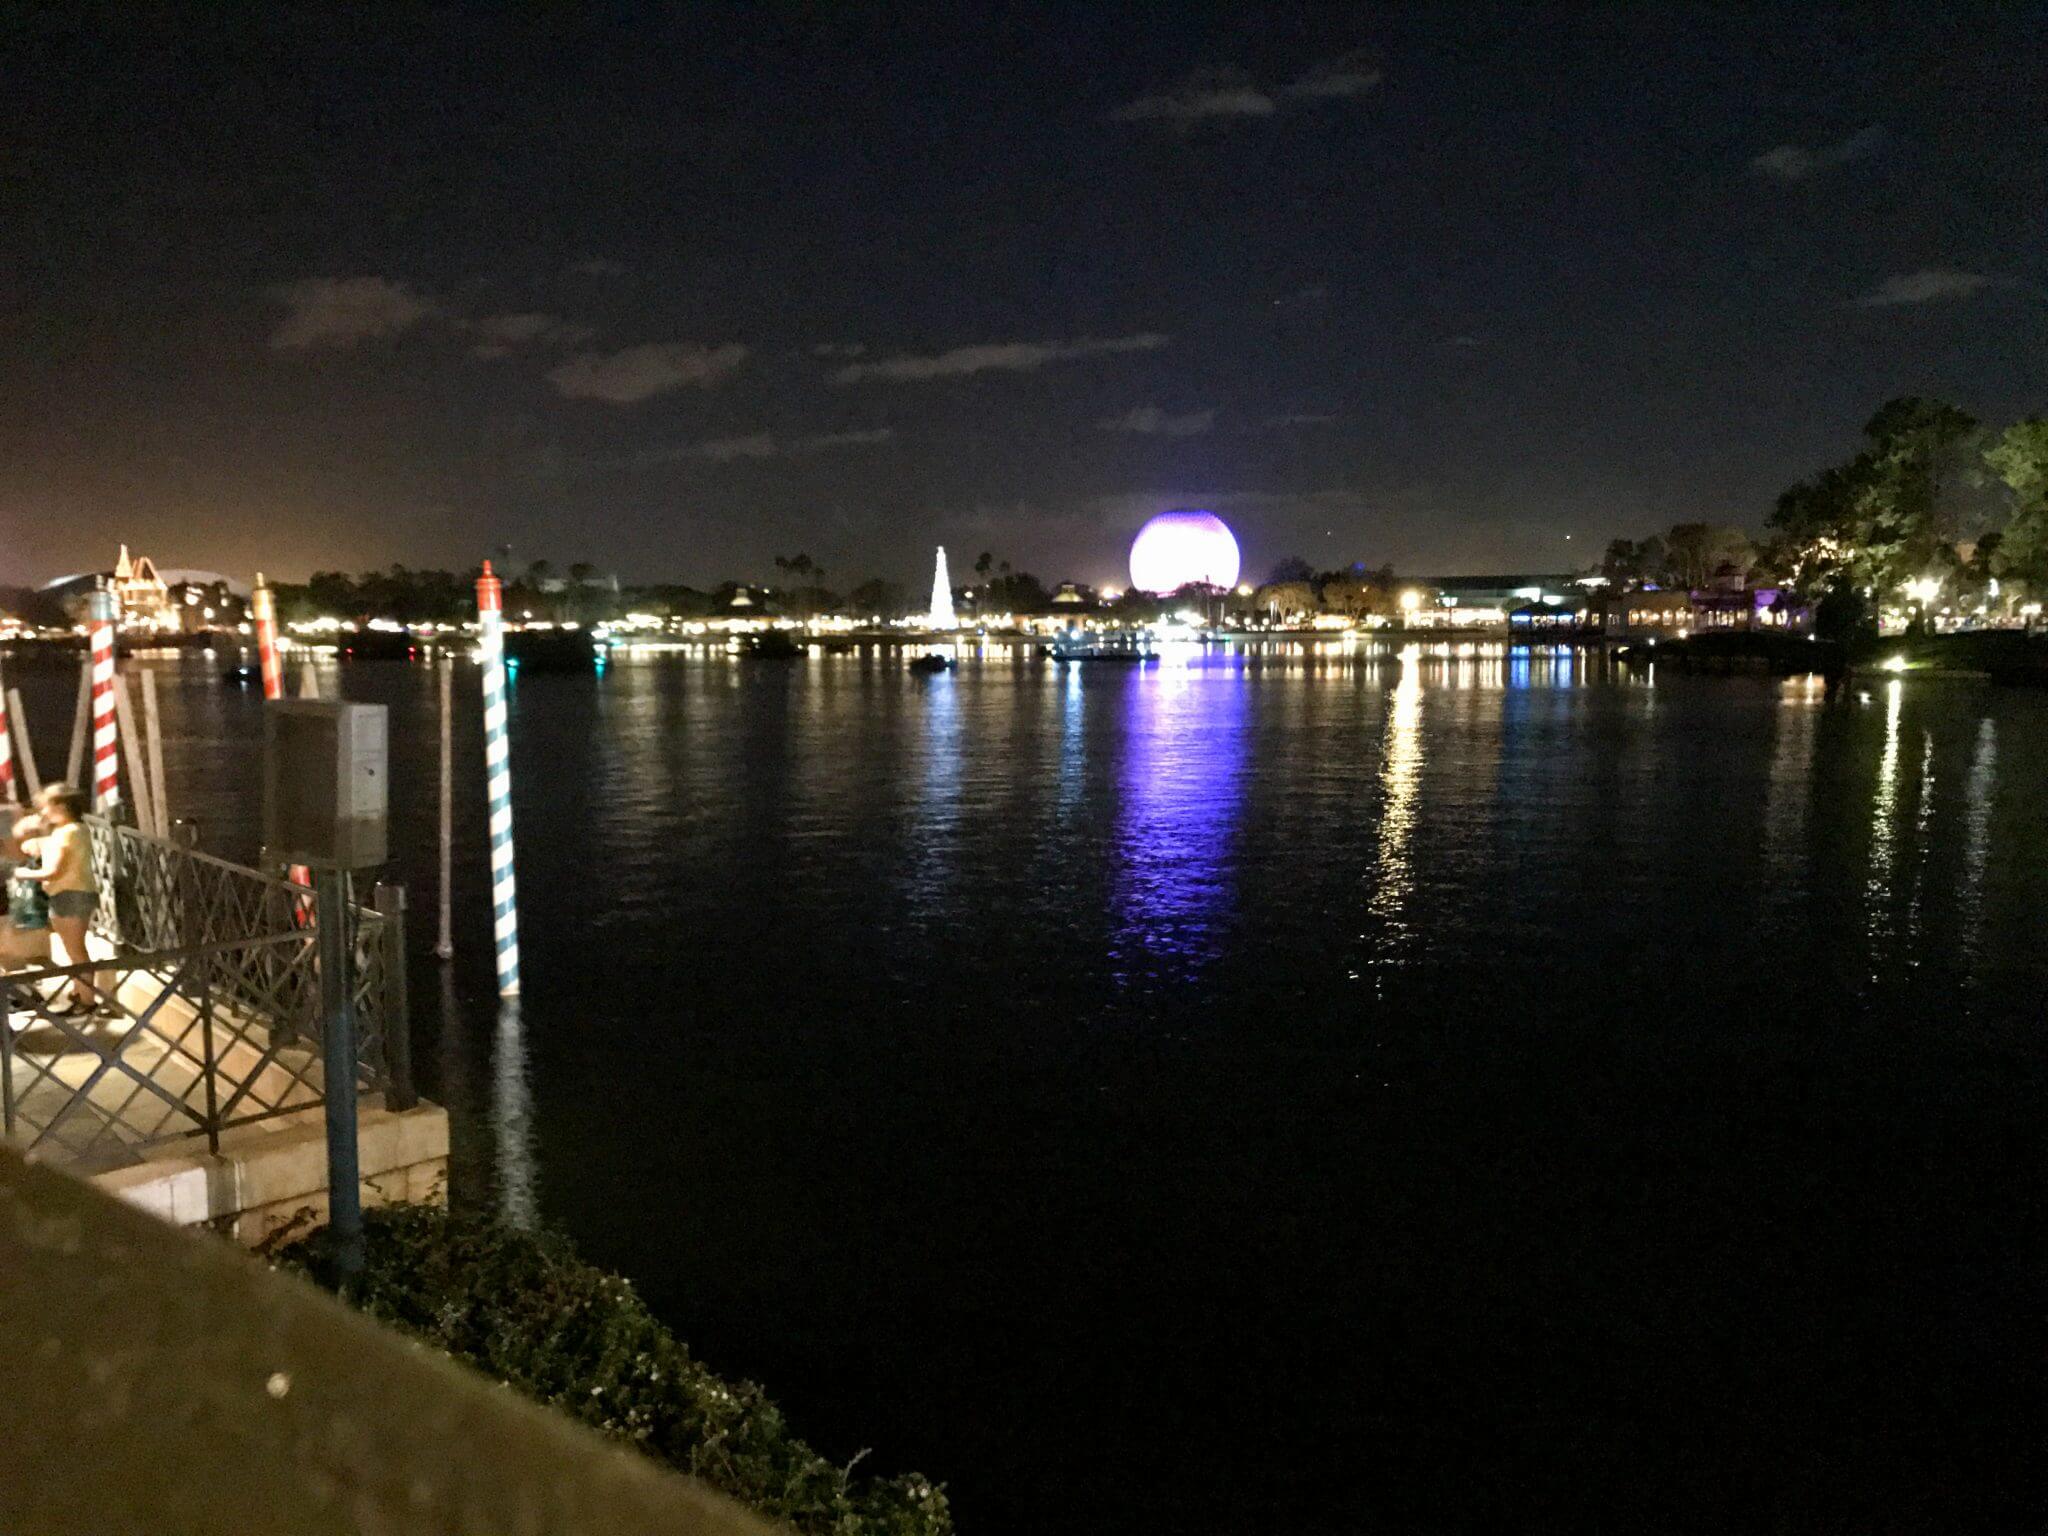 Visiting Epcot with your Extended Family. Tips for keeping the Peace while on vacation to Disney. www.HuntingforRubies.com